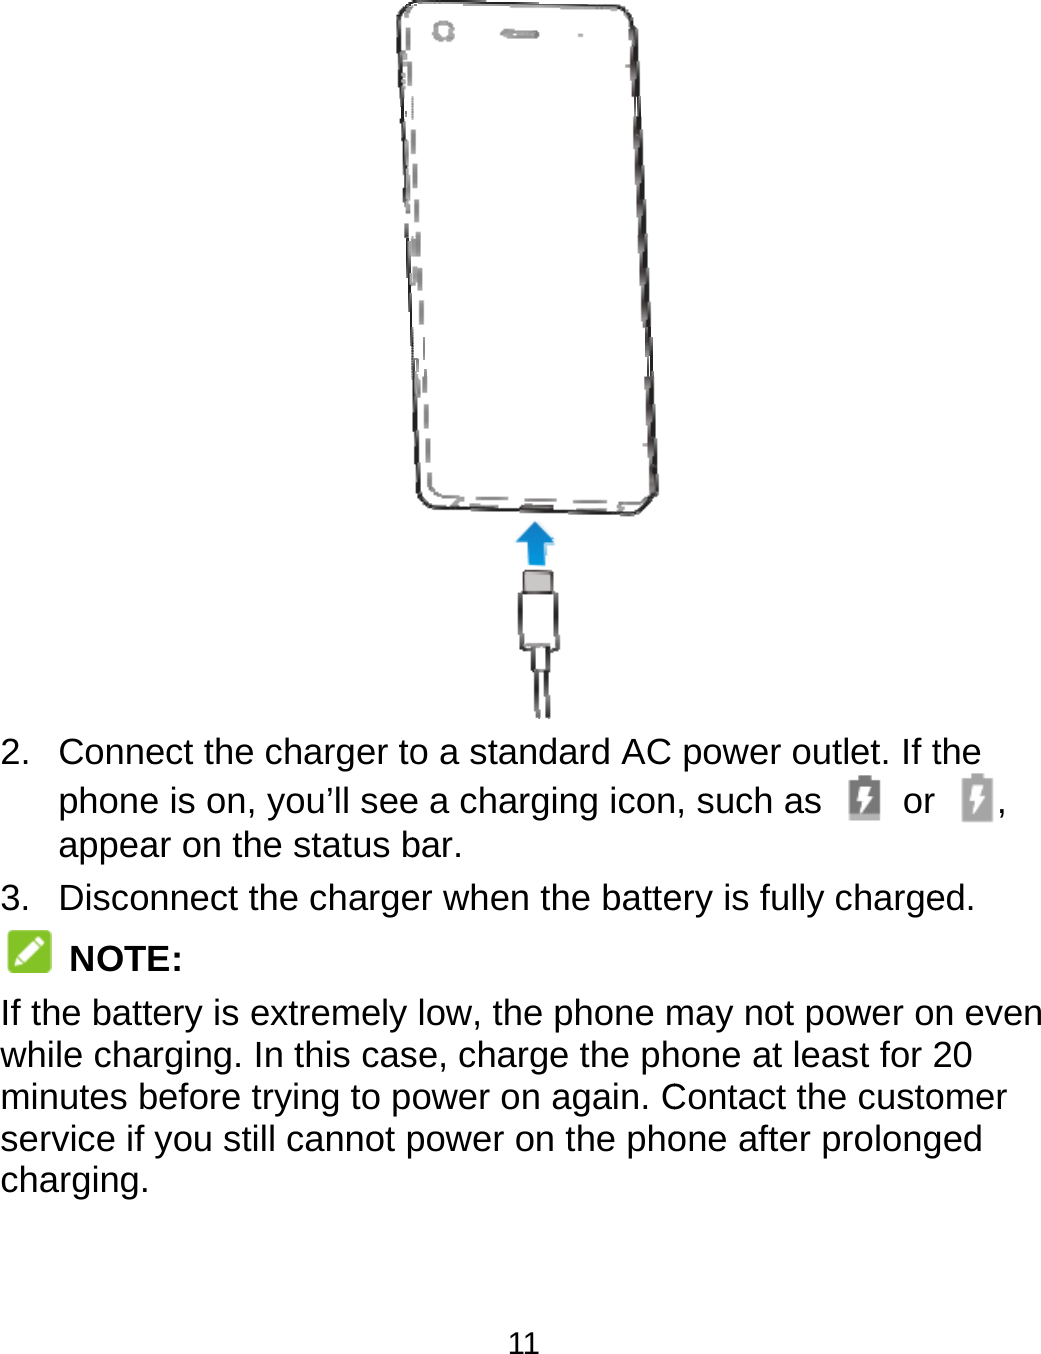  2. Connephoneappea3. Disco NOTEIf the battwhile chaminutes bservice if charging.  ect the charger toe is on, you’ll seear on the status bnnect the chargeE: tery is extremely rging. In this casbefore trying to pyou still cannot p11 o a standard AC e a charging iconbar. er when the battelow, the phone mse, charge the phower on again. Cpower on the phopower outlet. If t, such as    or ery is fully chargemay not power ohone at least for 2Contact the custoone after prolongthe r, ed. n even 20 omer ged 